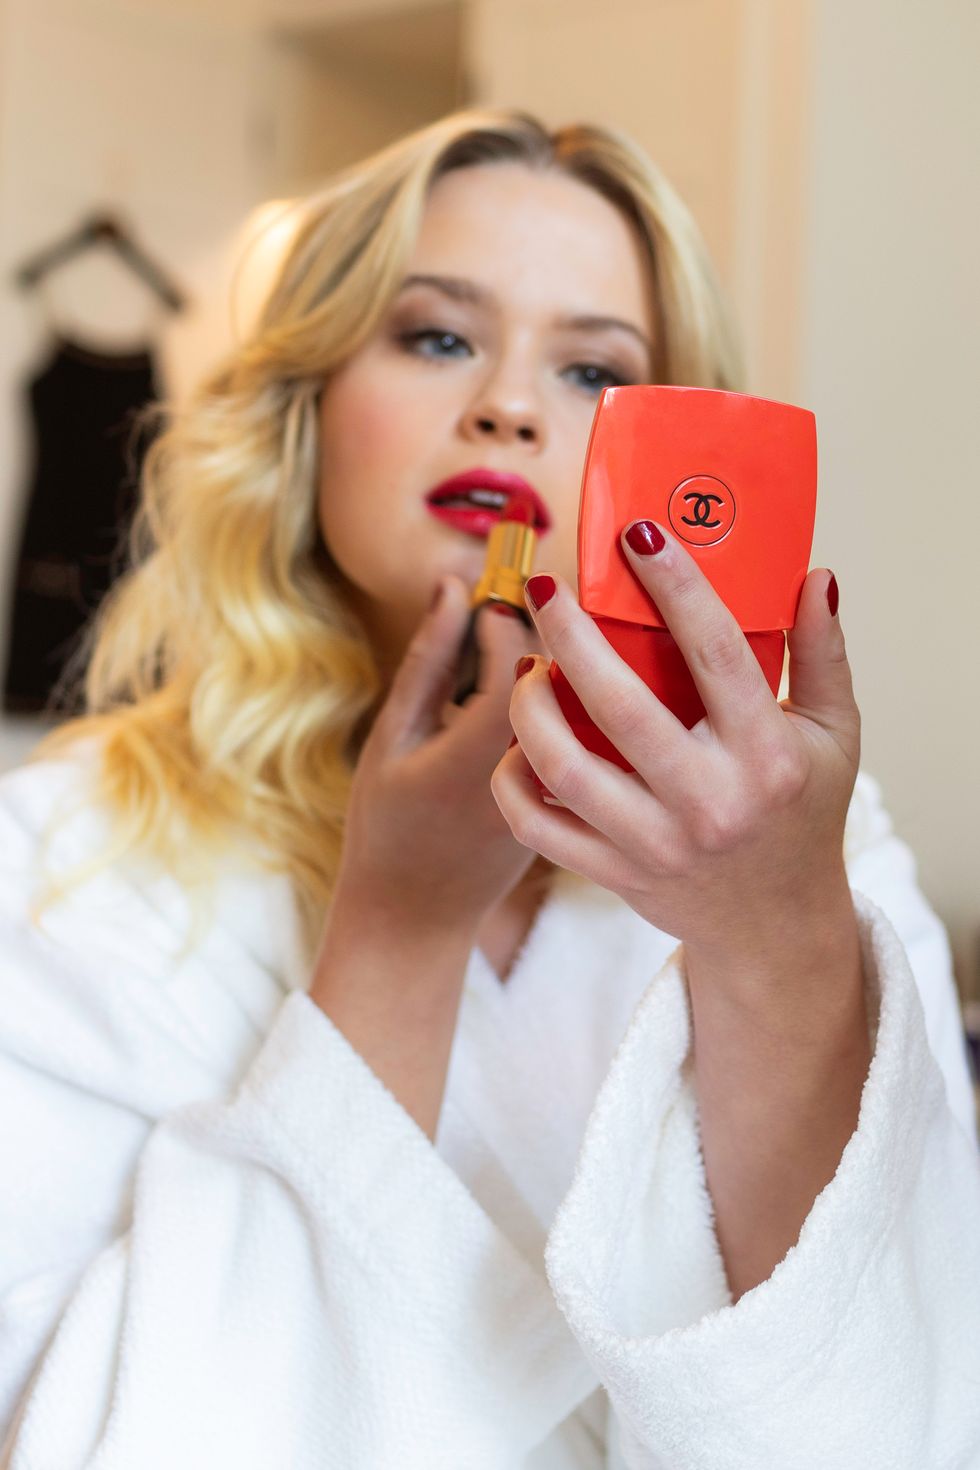 Getting Ready With Ava Phillippe and Chanel for the Lucky Chance Diner